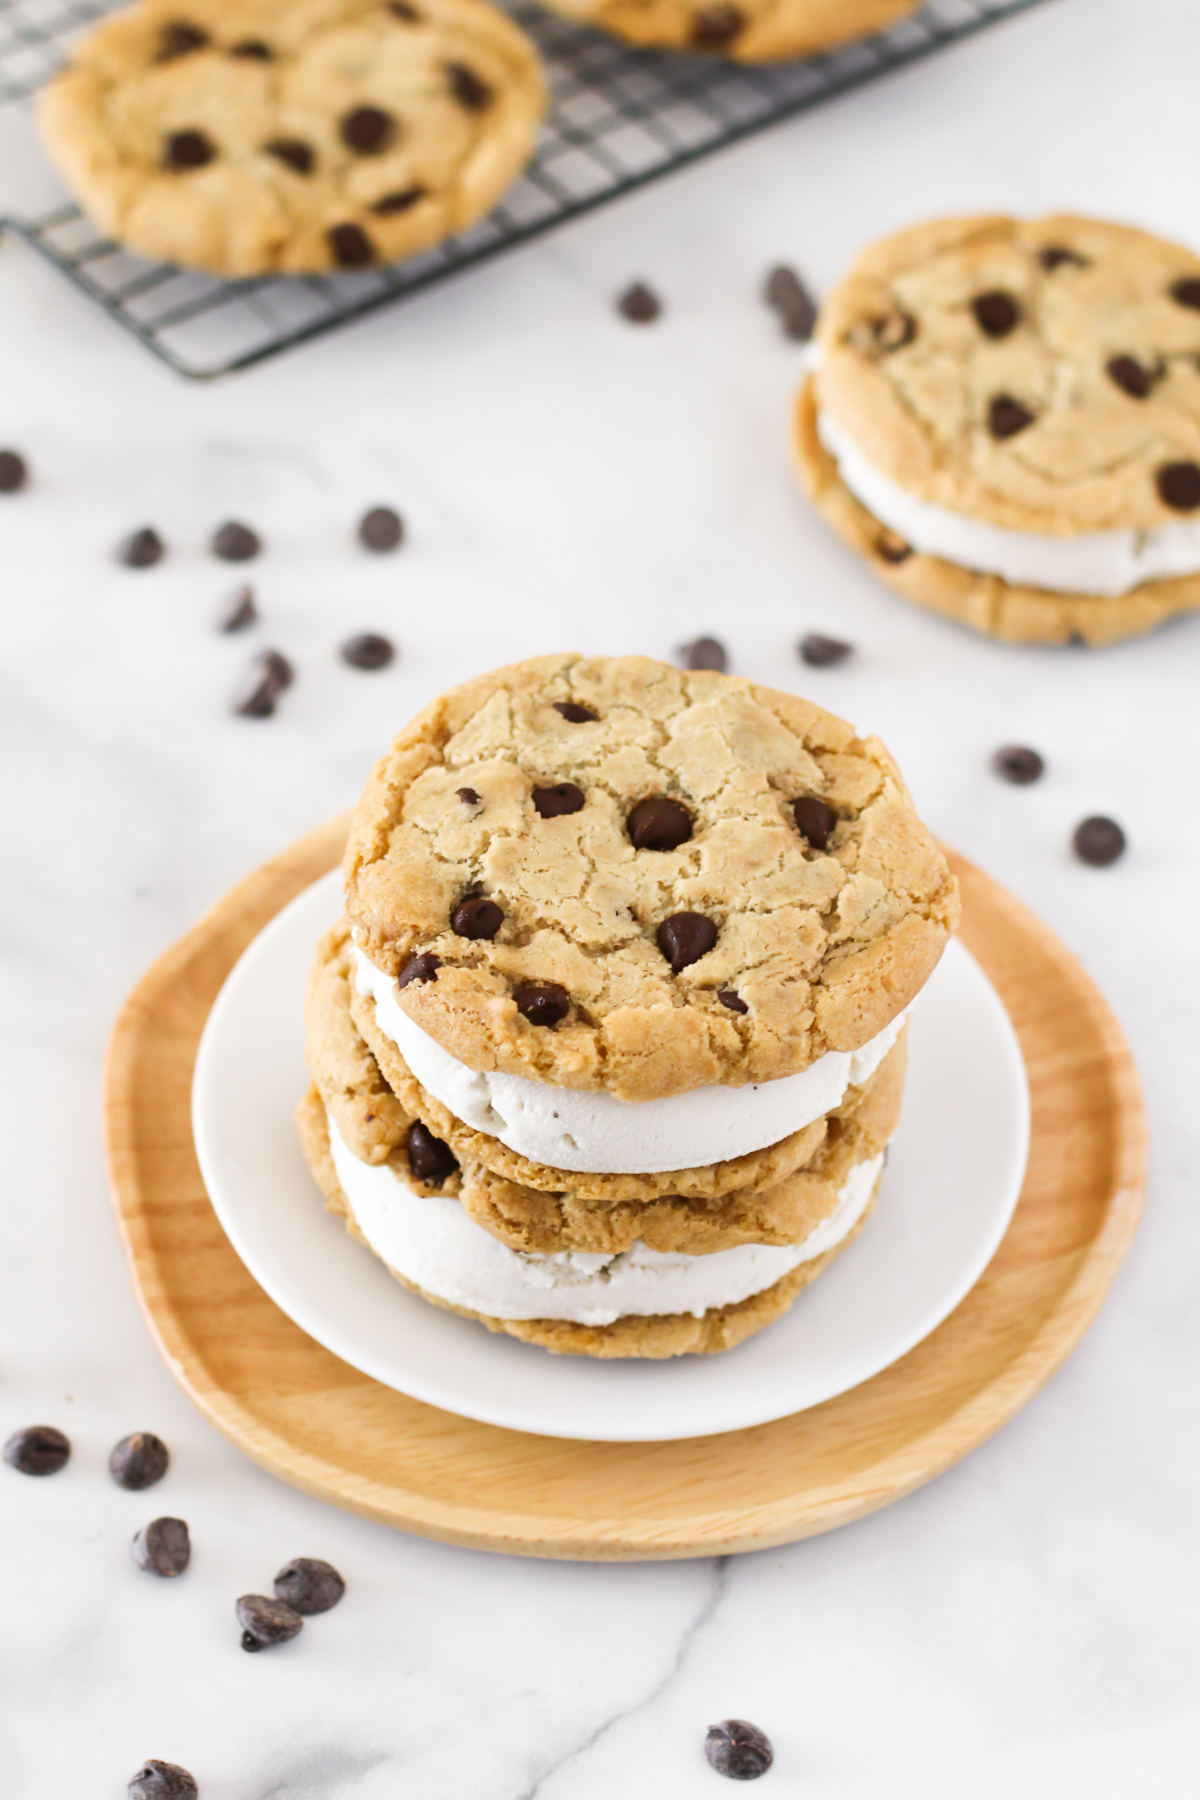 Gluten Free Vegan Chocolate Chip Cookie Ice Cream Sandwiches. Creamy vanilla ice cream, sandwiched between two chocolate chip cookies. What could be better?